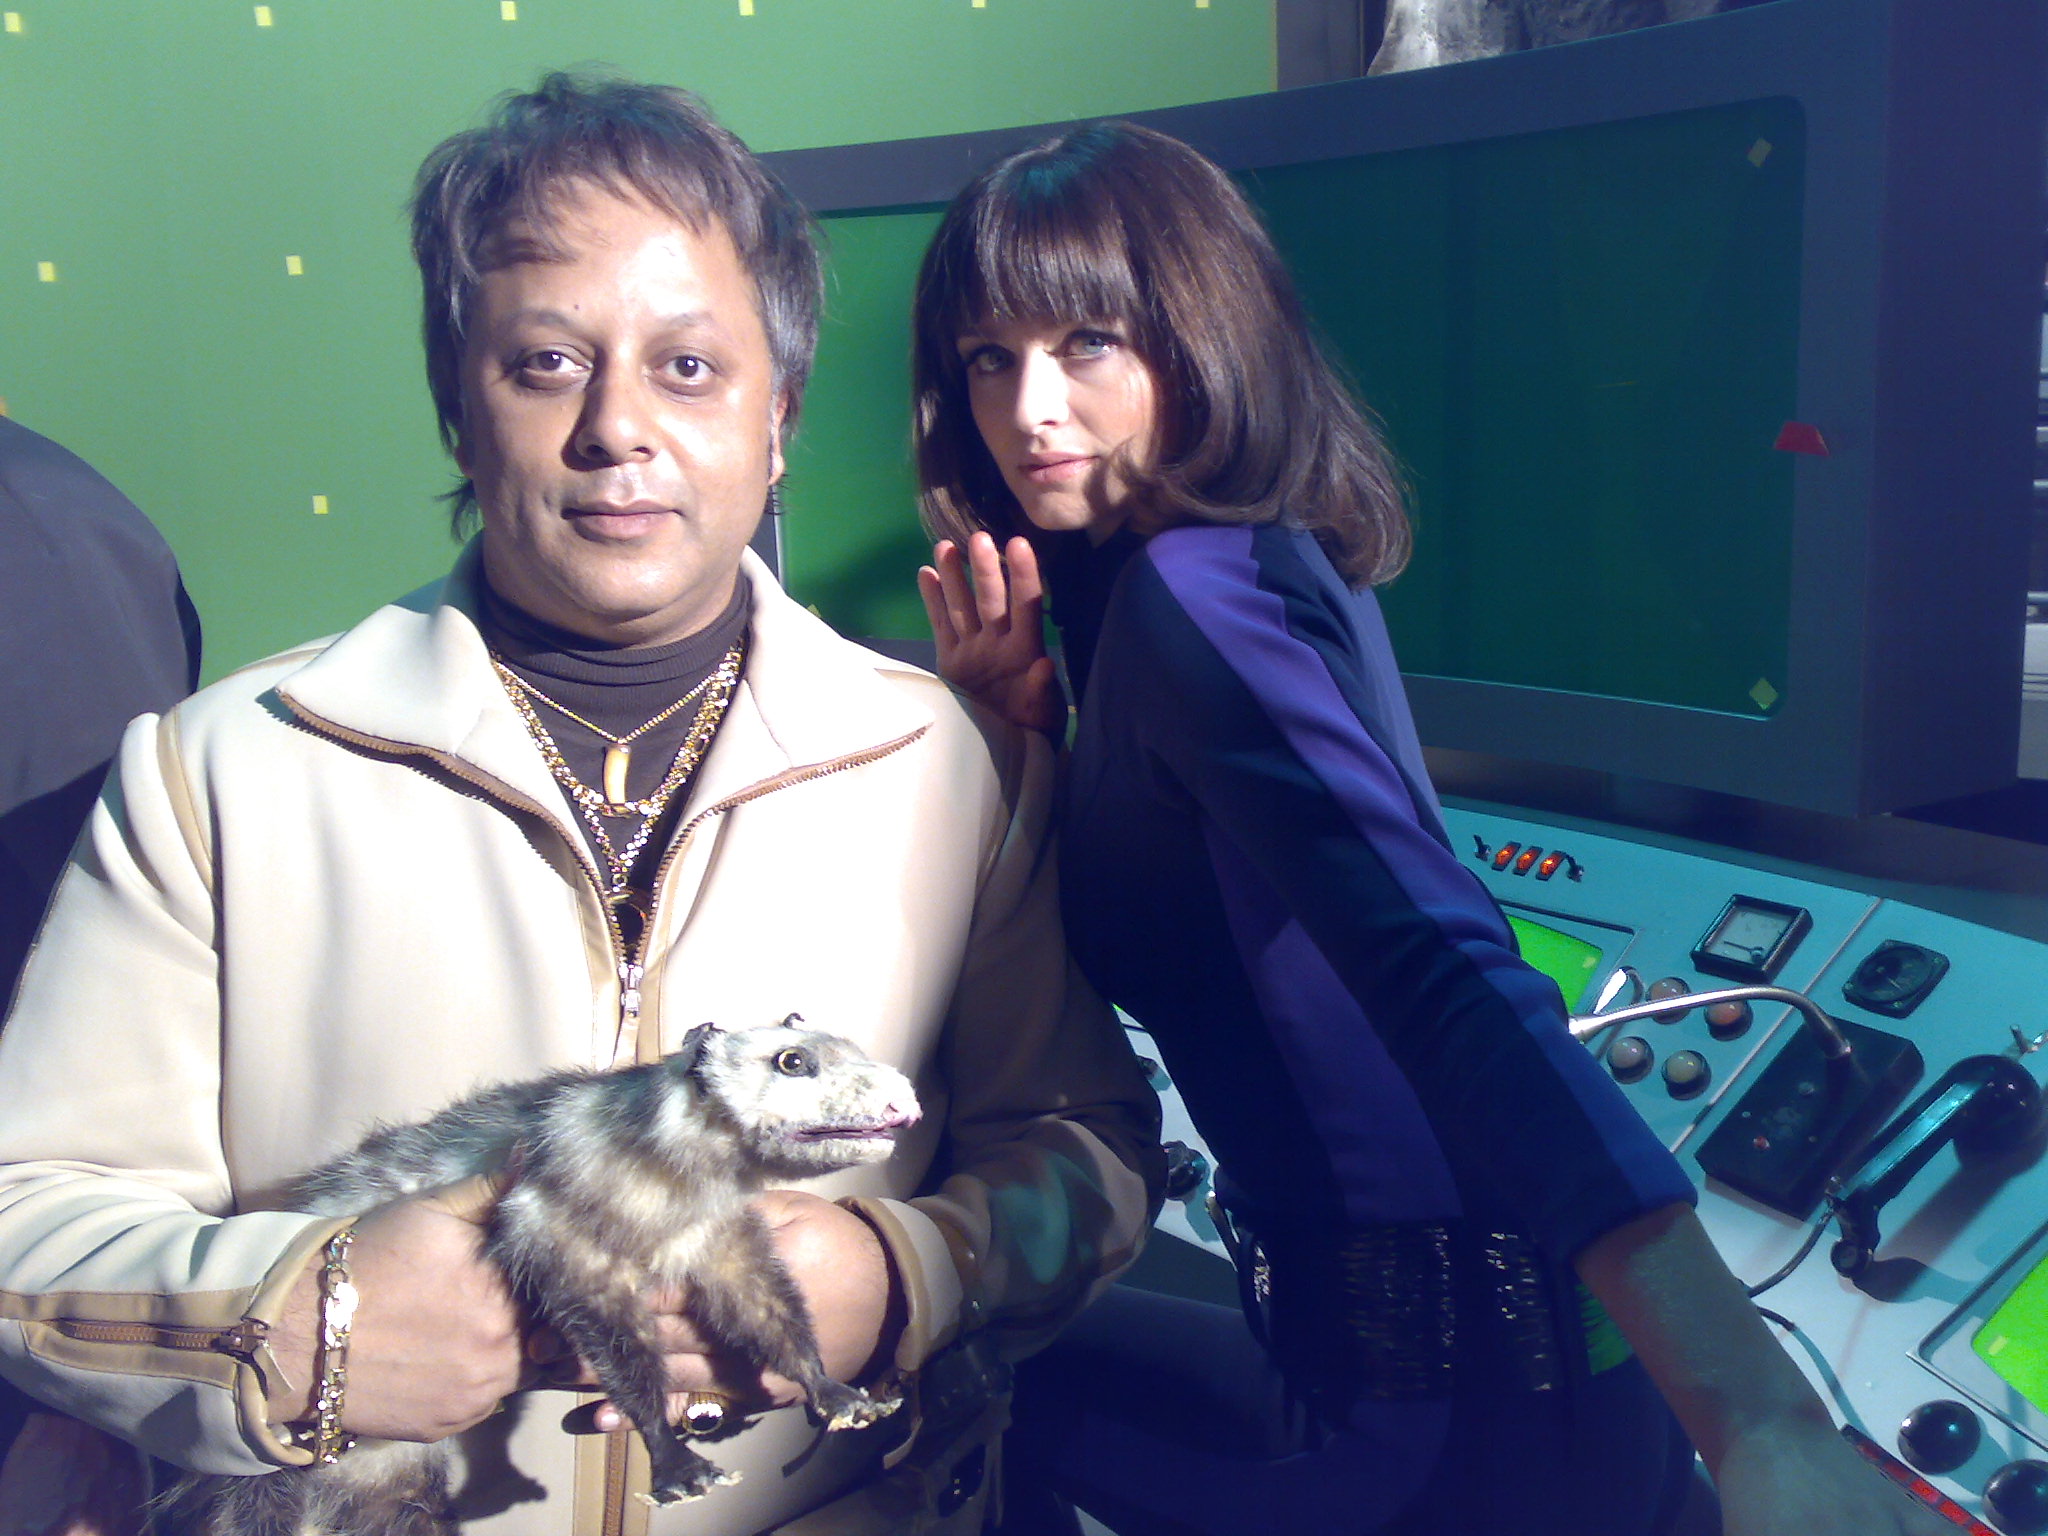 Kammy Darweish as Mega Villain on the set of Capital One's 'Mega Villain' TV Commercial (with Jess Murphy and 'Reggie the Possum')